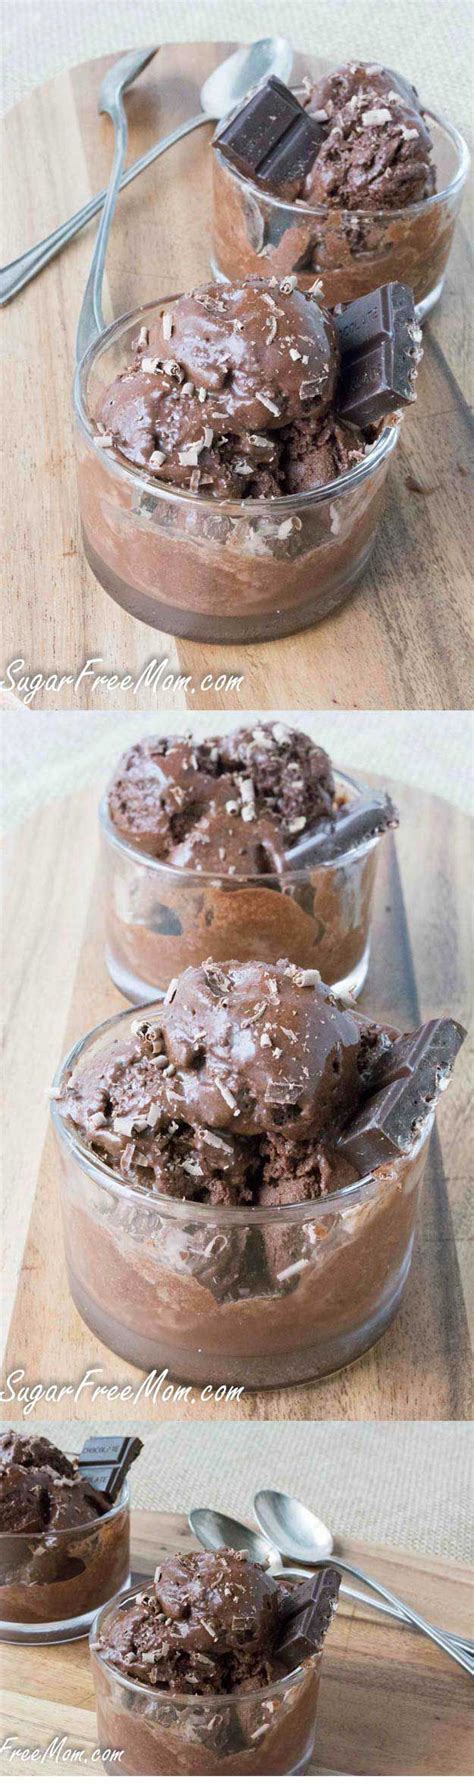 This bowl of fluffy goodness has just the right counter balancing dash of make this frozen dessert when ripe, juicy peaches are in season. Sugar Free Dairy Free Chocolate Sorbet | Recipe | Clean eating desserts, Chocolate sorbet, Dairy ...